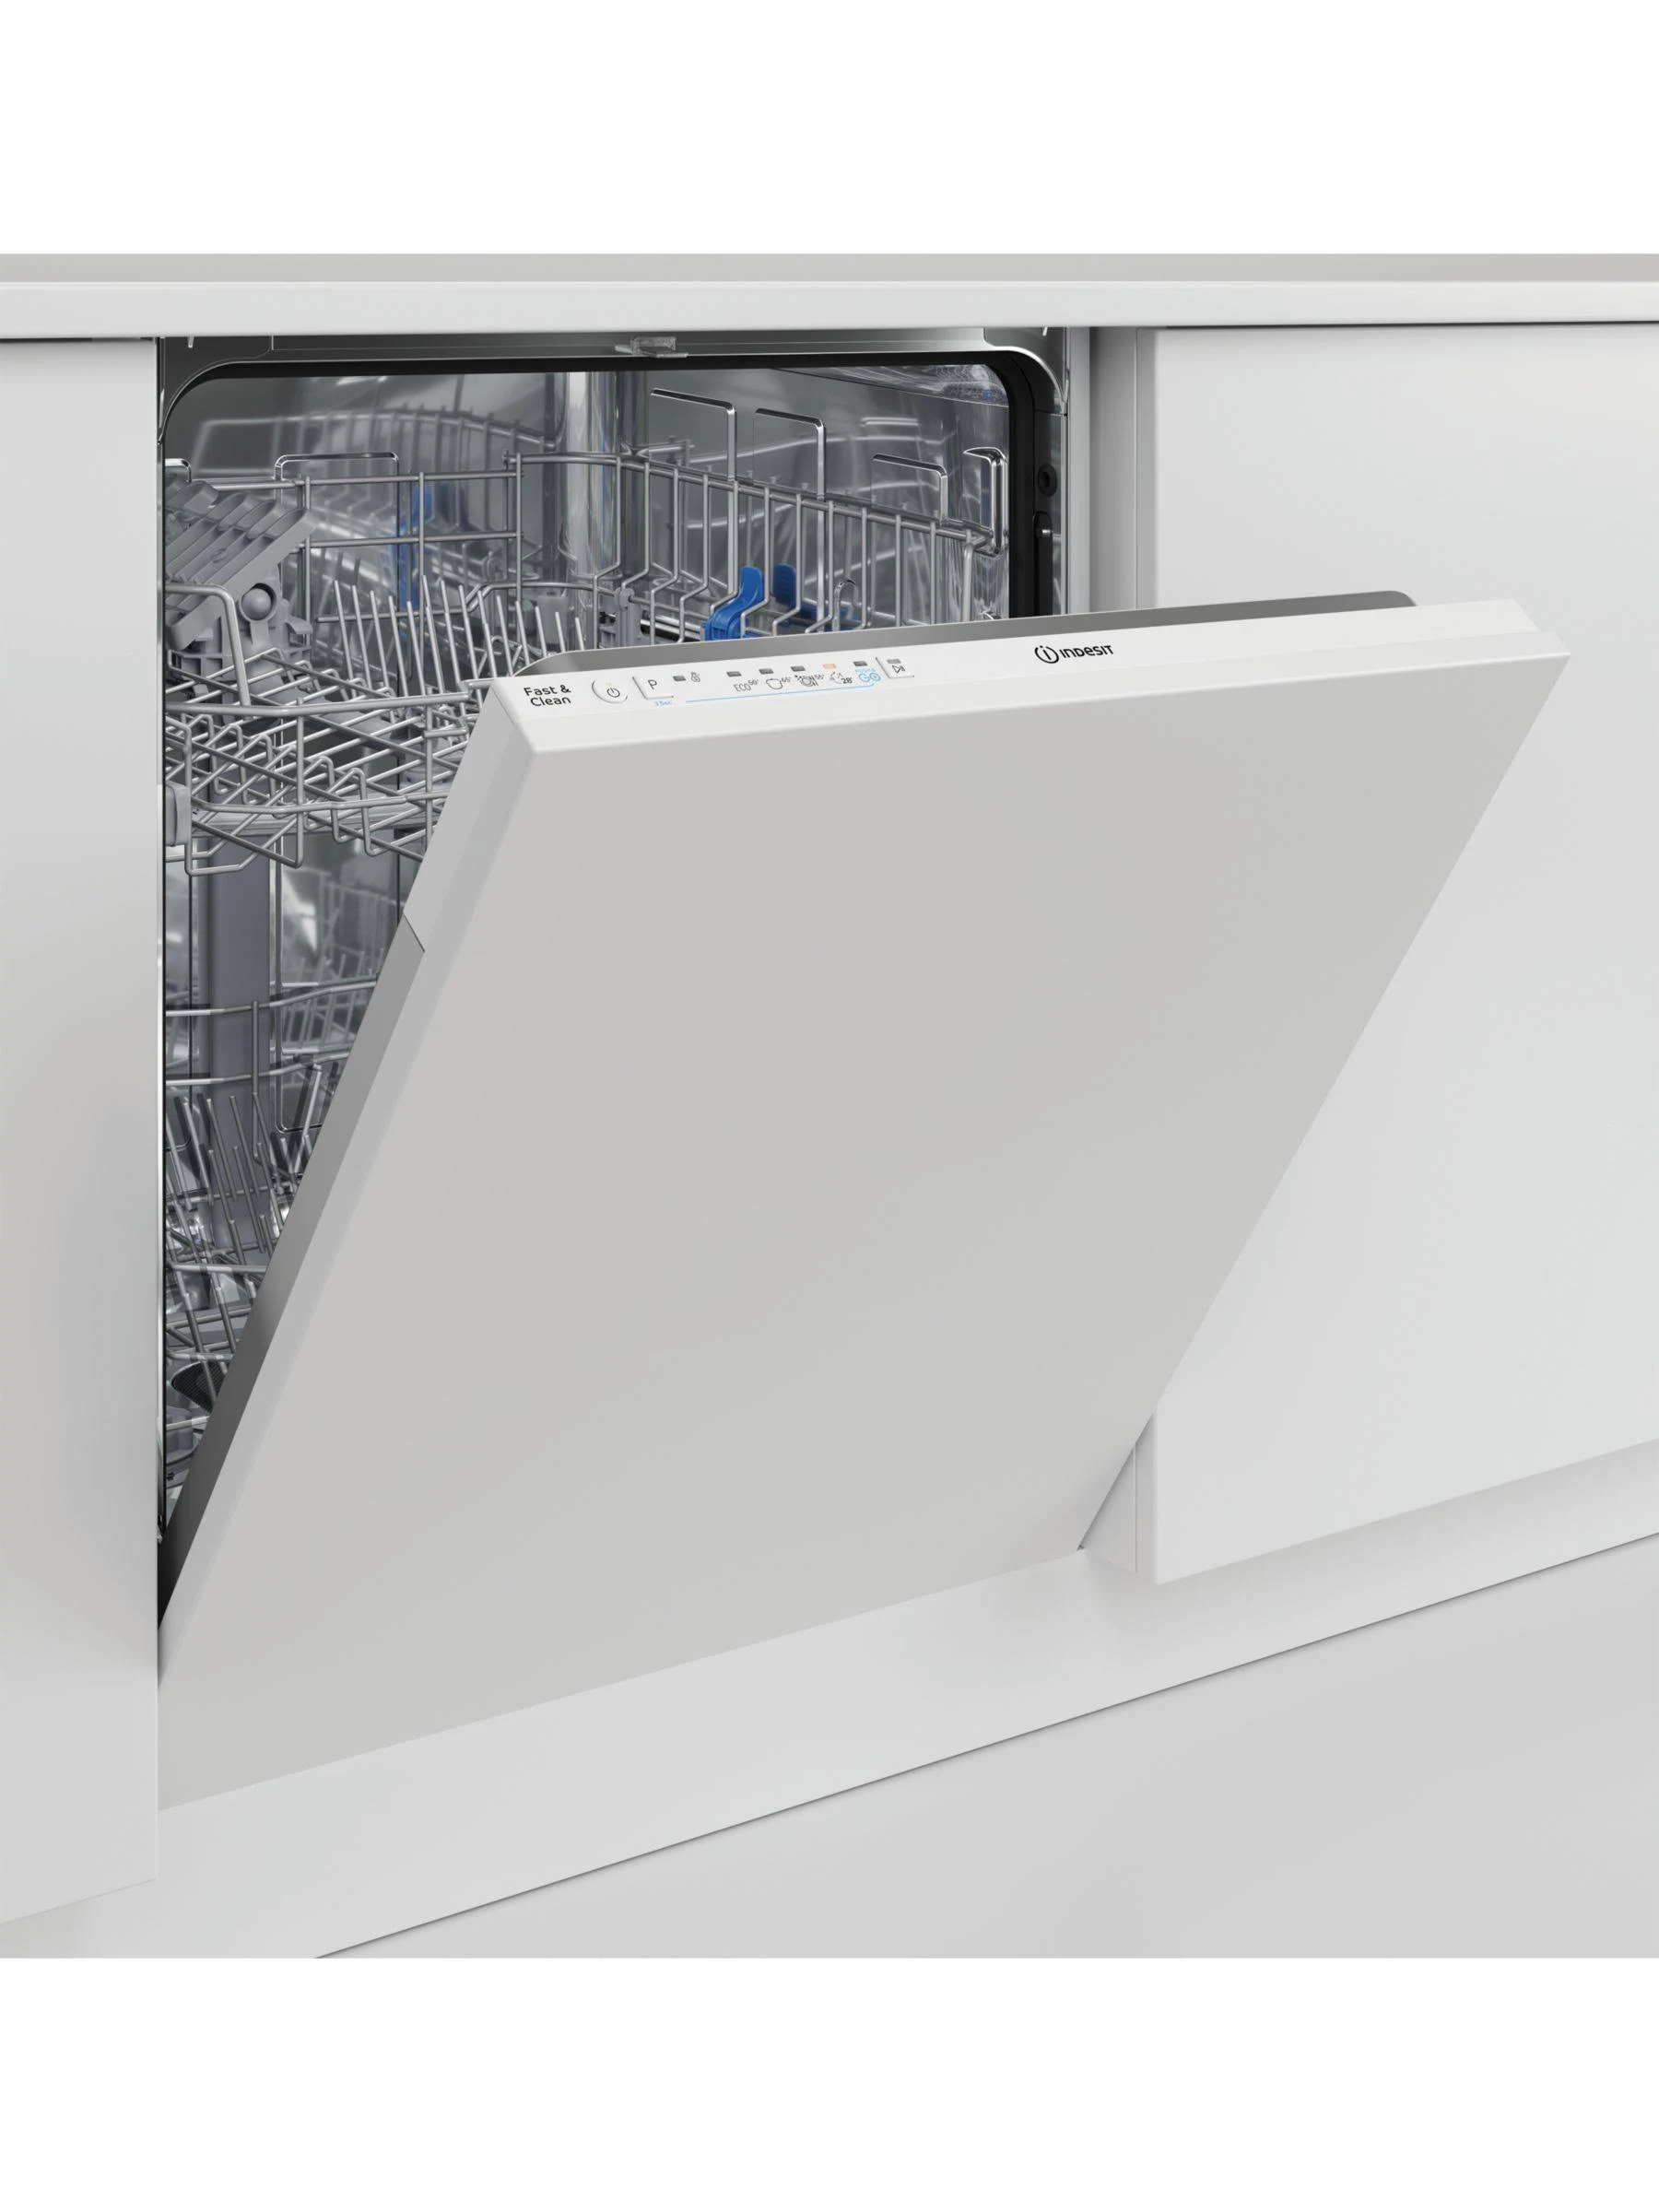 Indesit Integrated Dishwasher 600mm Full Size, White Colour - DIE 2B19 UK